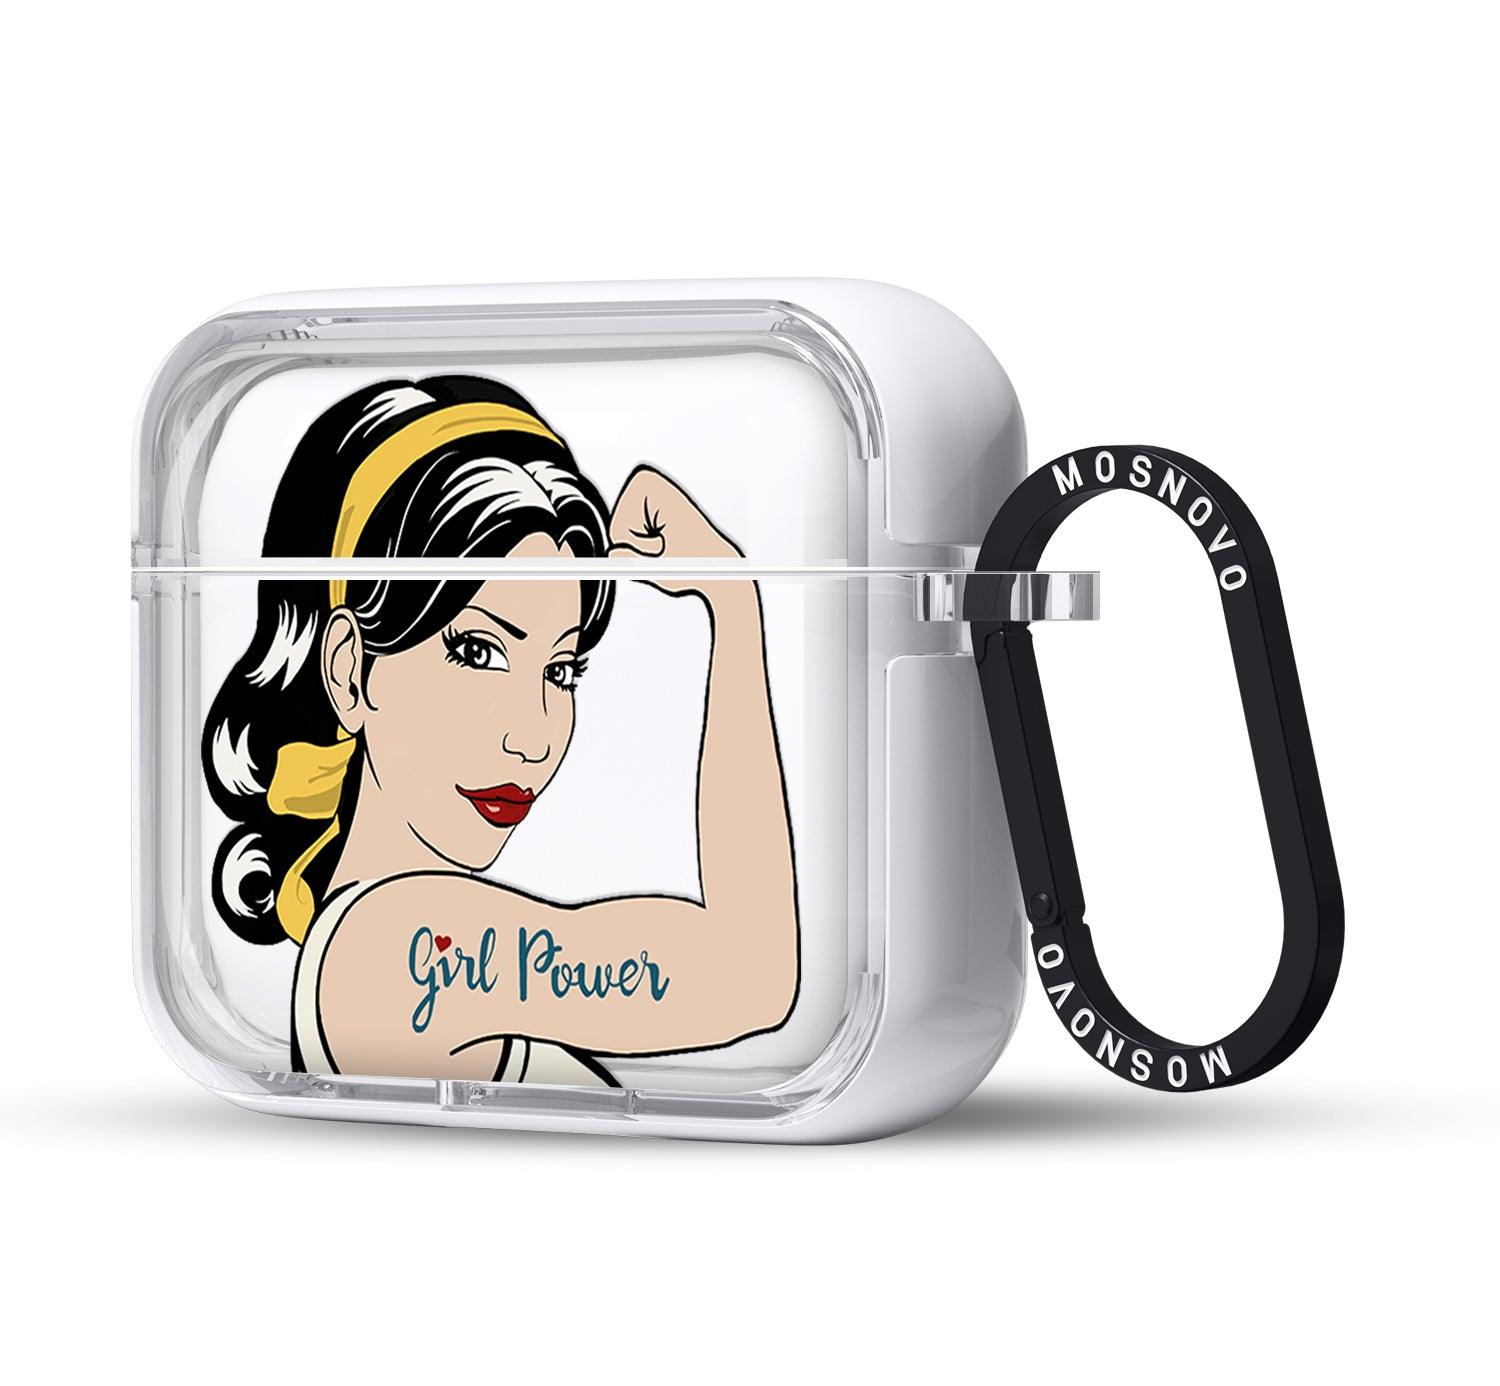 Girl Power AirPods 3 Case (3rd Generation) - MOSNOVO